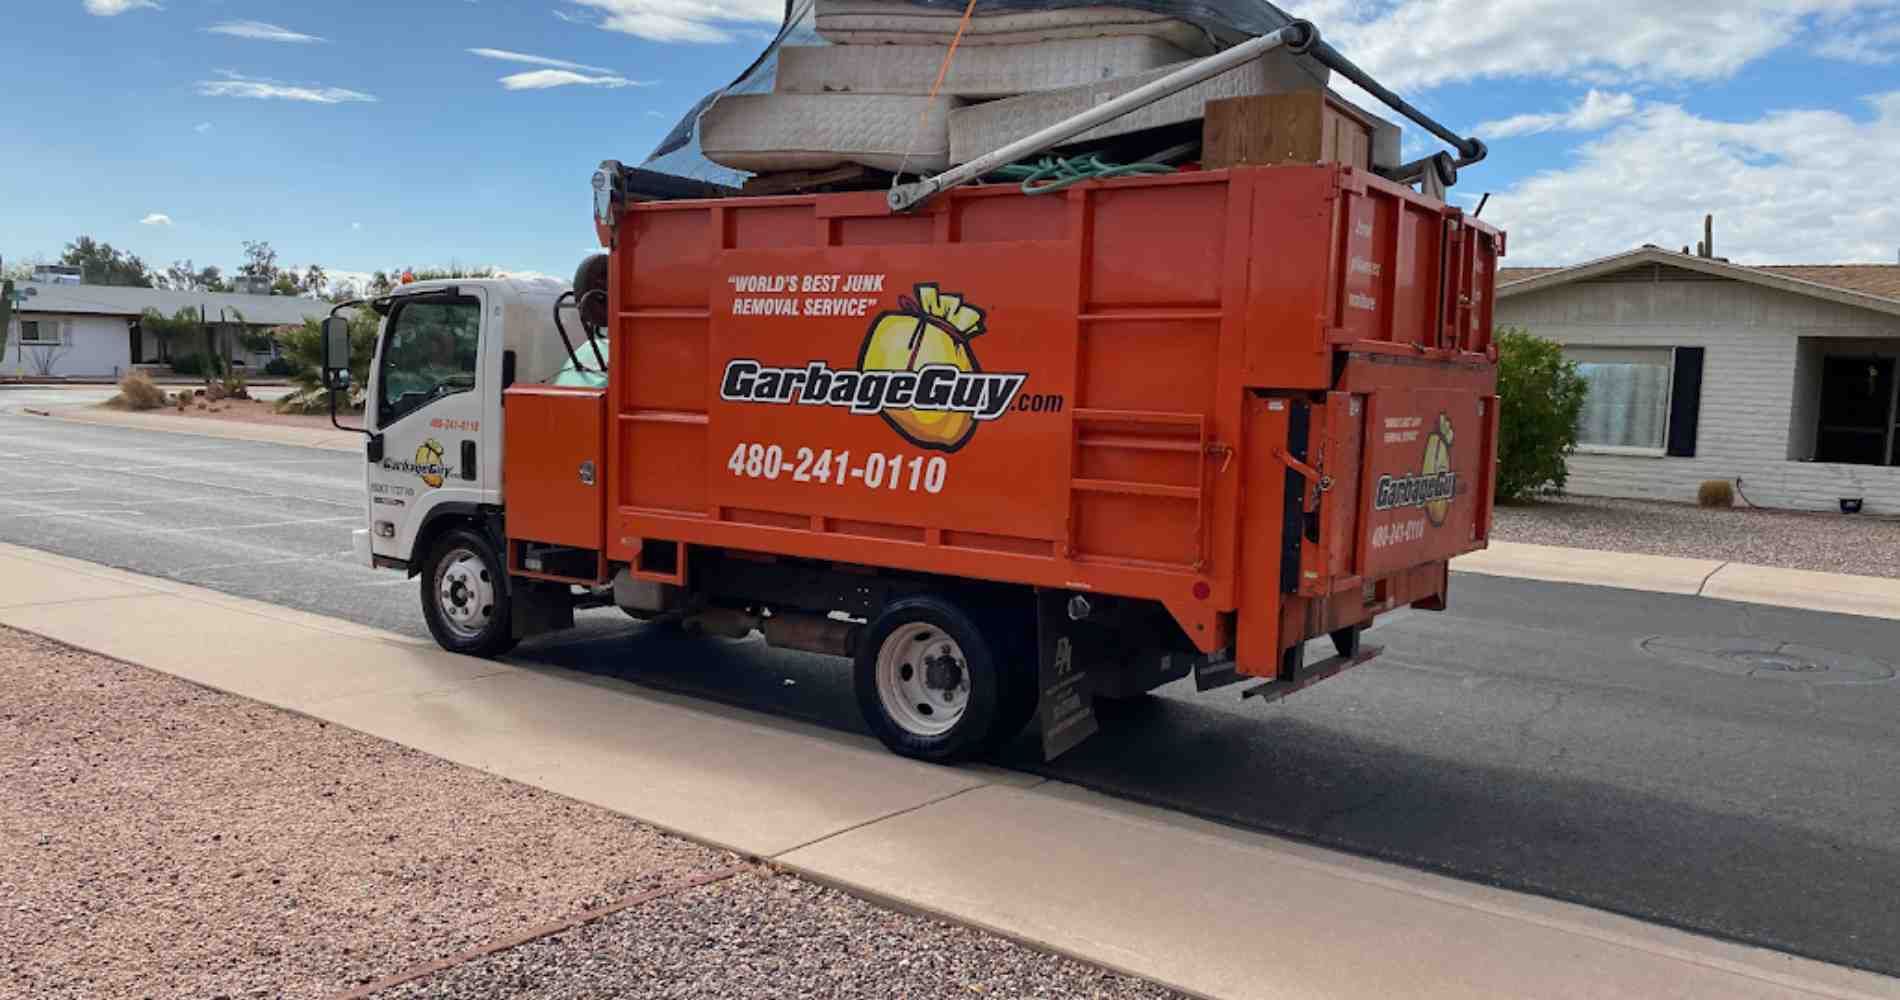 #1 for Curbside Trash Pickup in Tempe, AZ with Over 1200 5-Star Reviews!